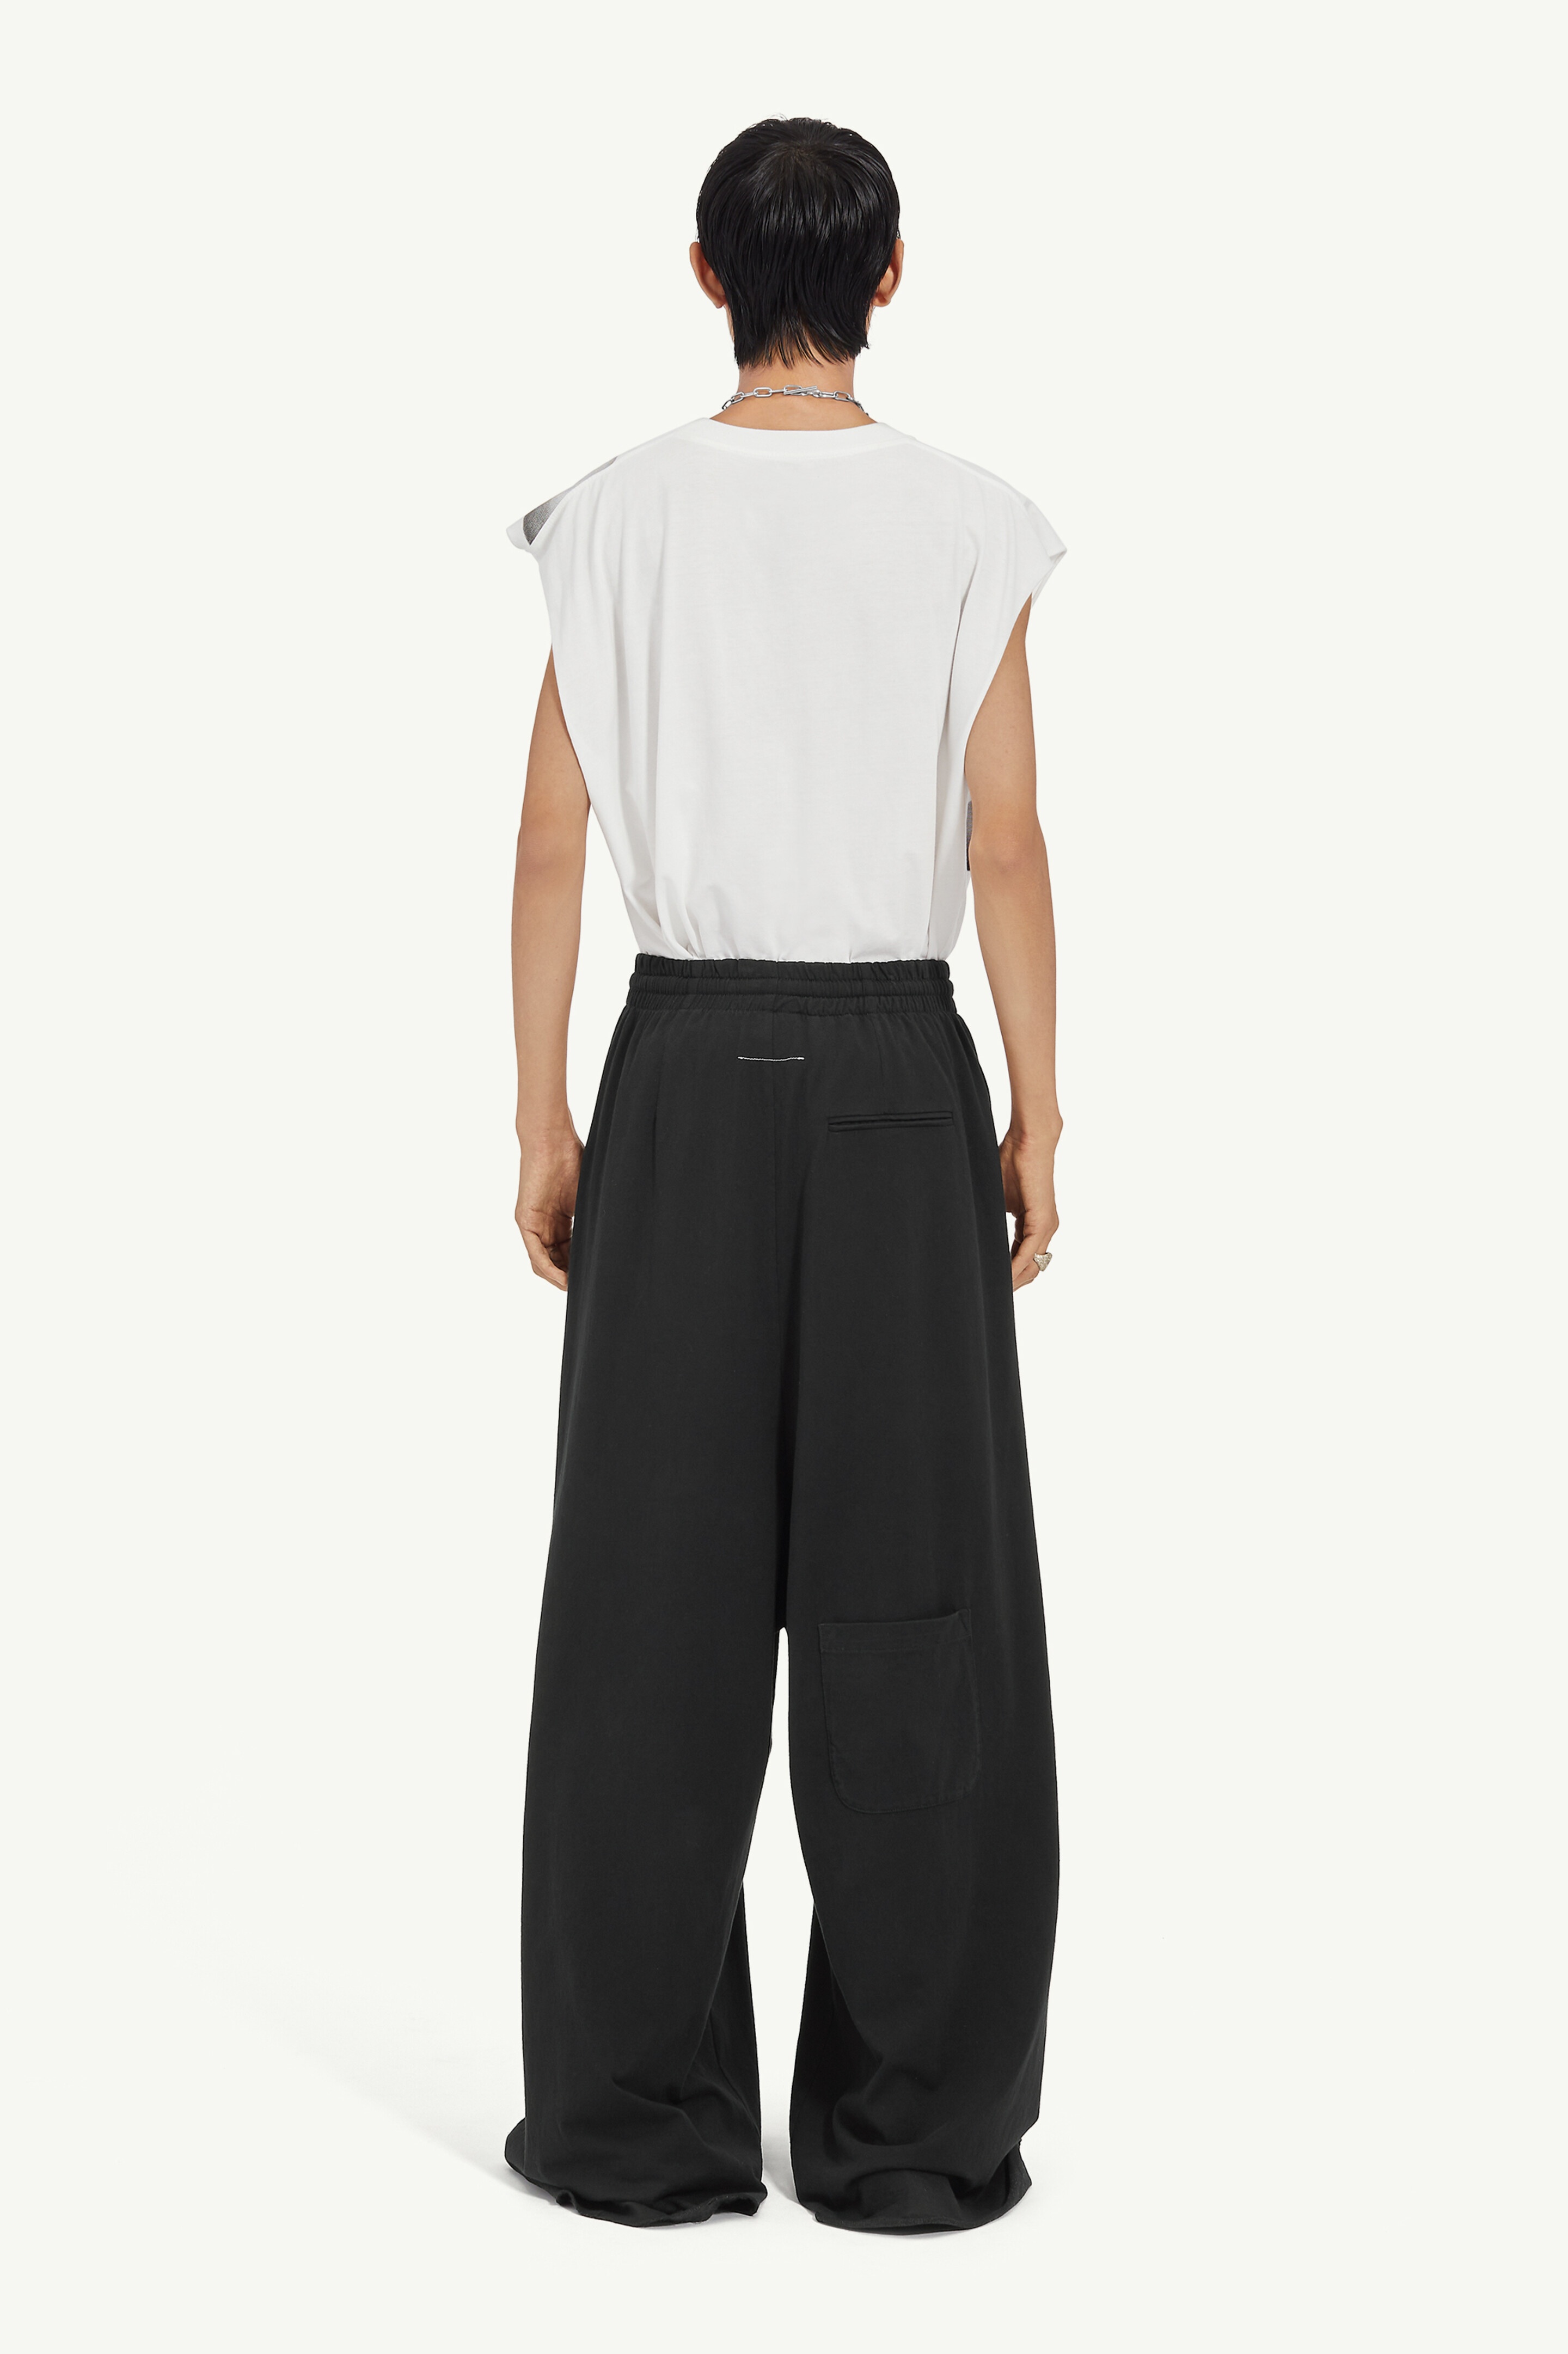 Unbrushed sweat jersey trousers - 4